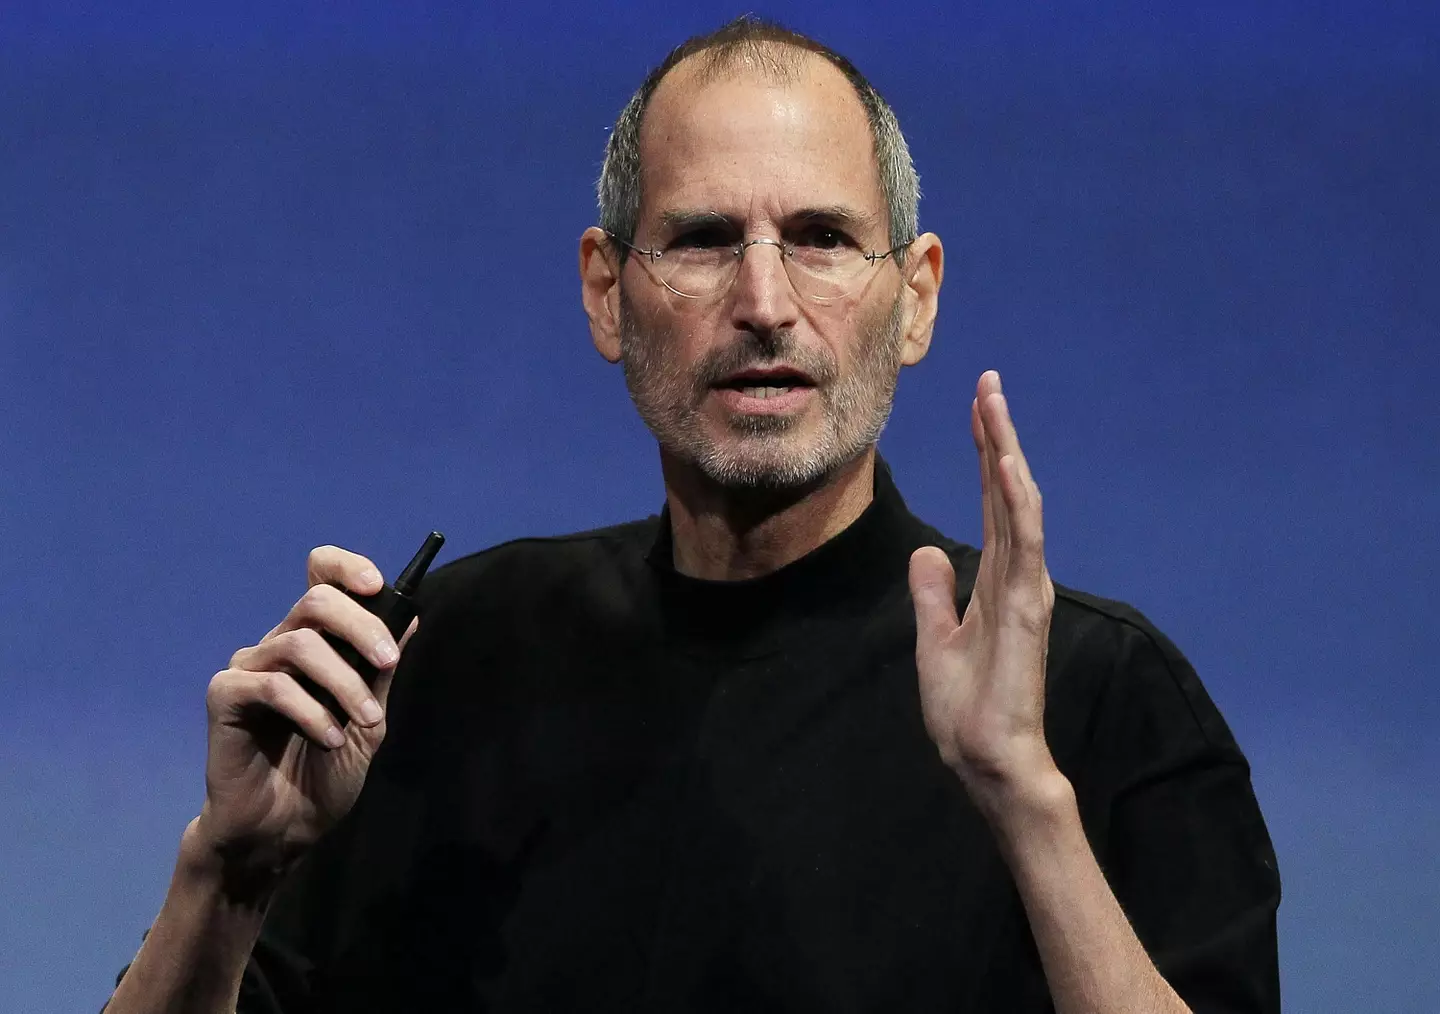 Steve Jobs hoped to loosen people up with the beer test.